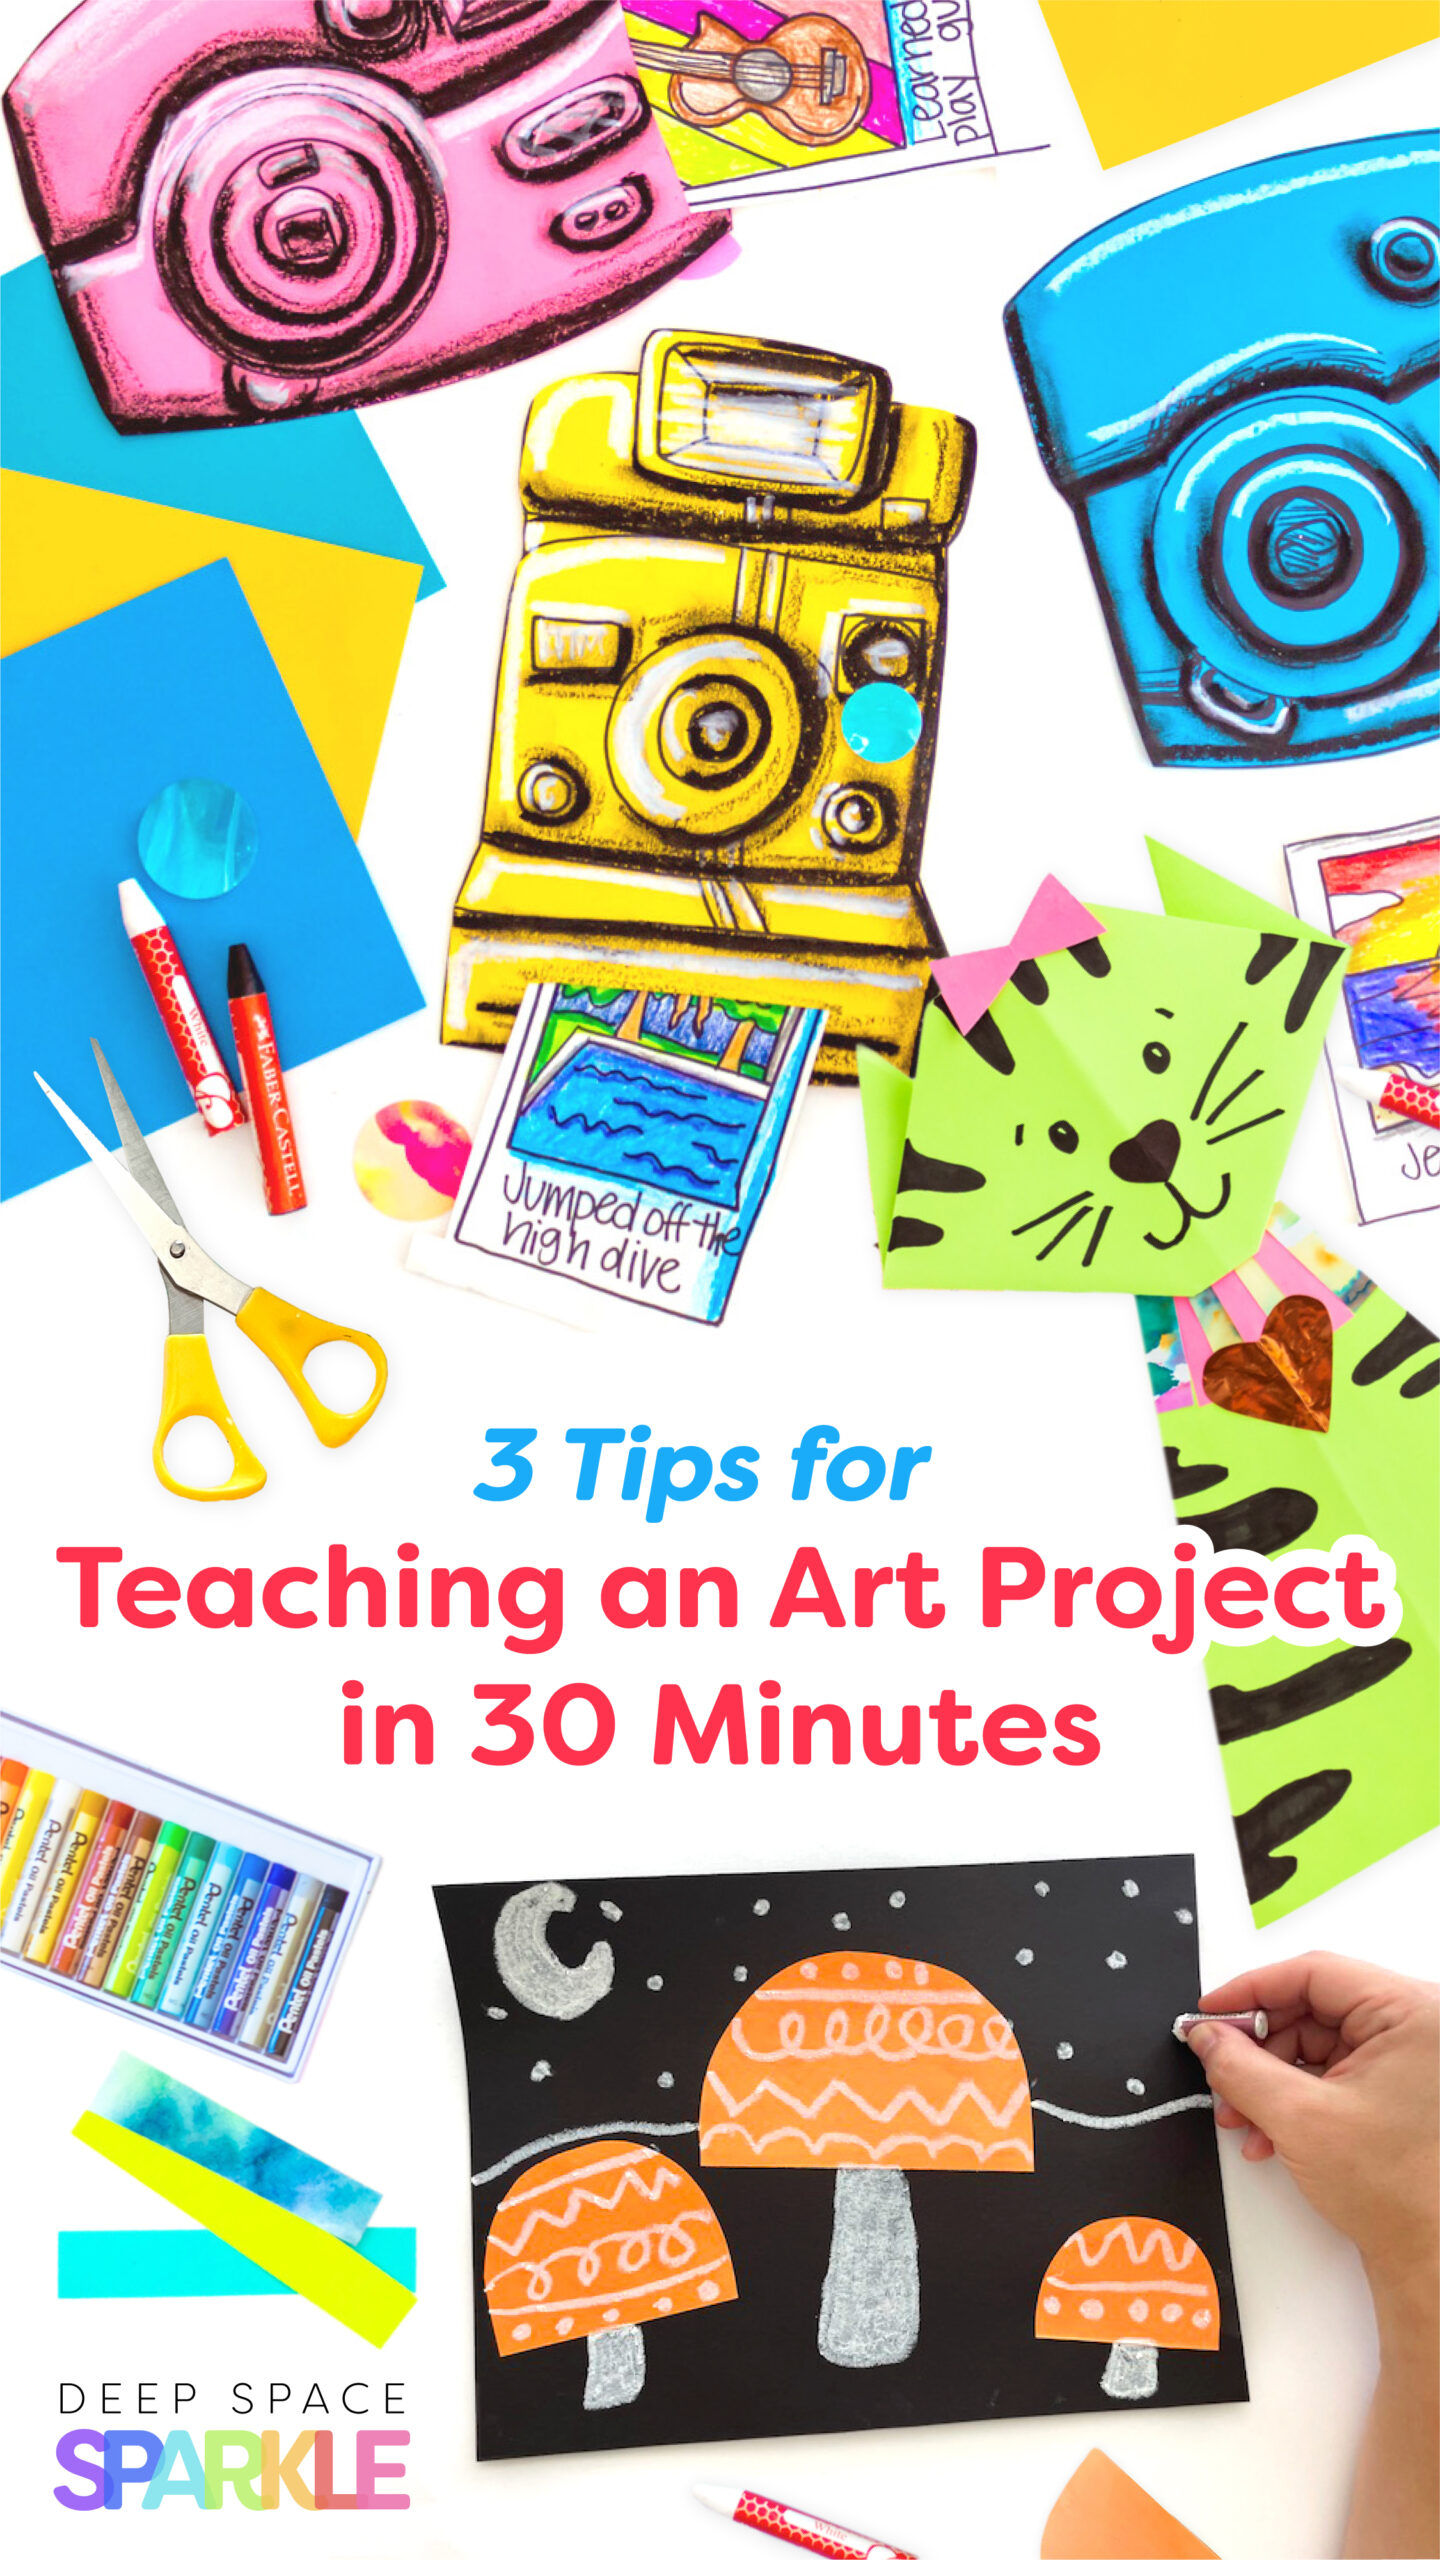 Pin 3 Tips for Teaching a Project in 30 Minutes